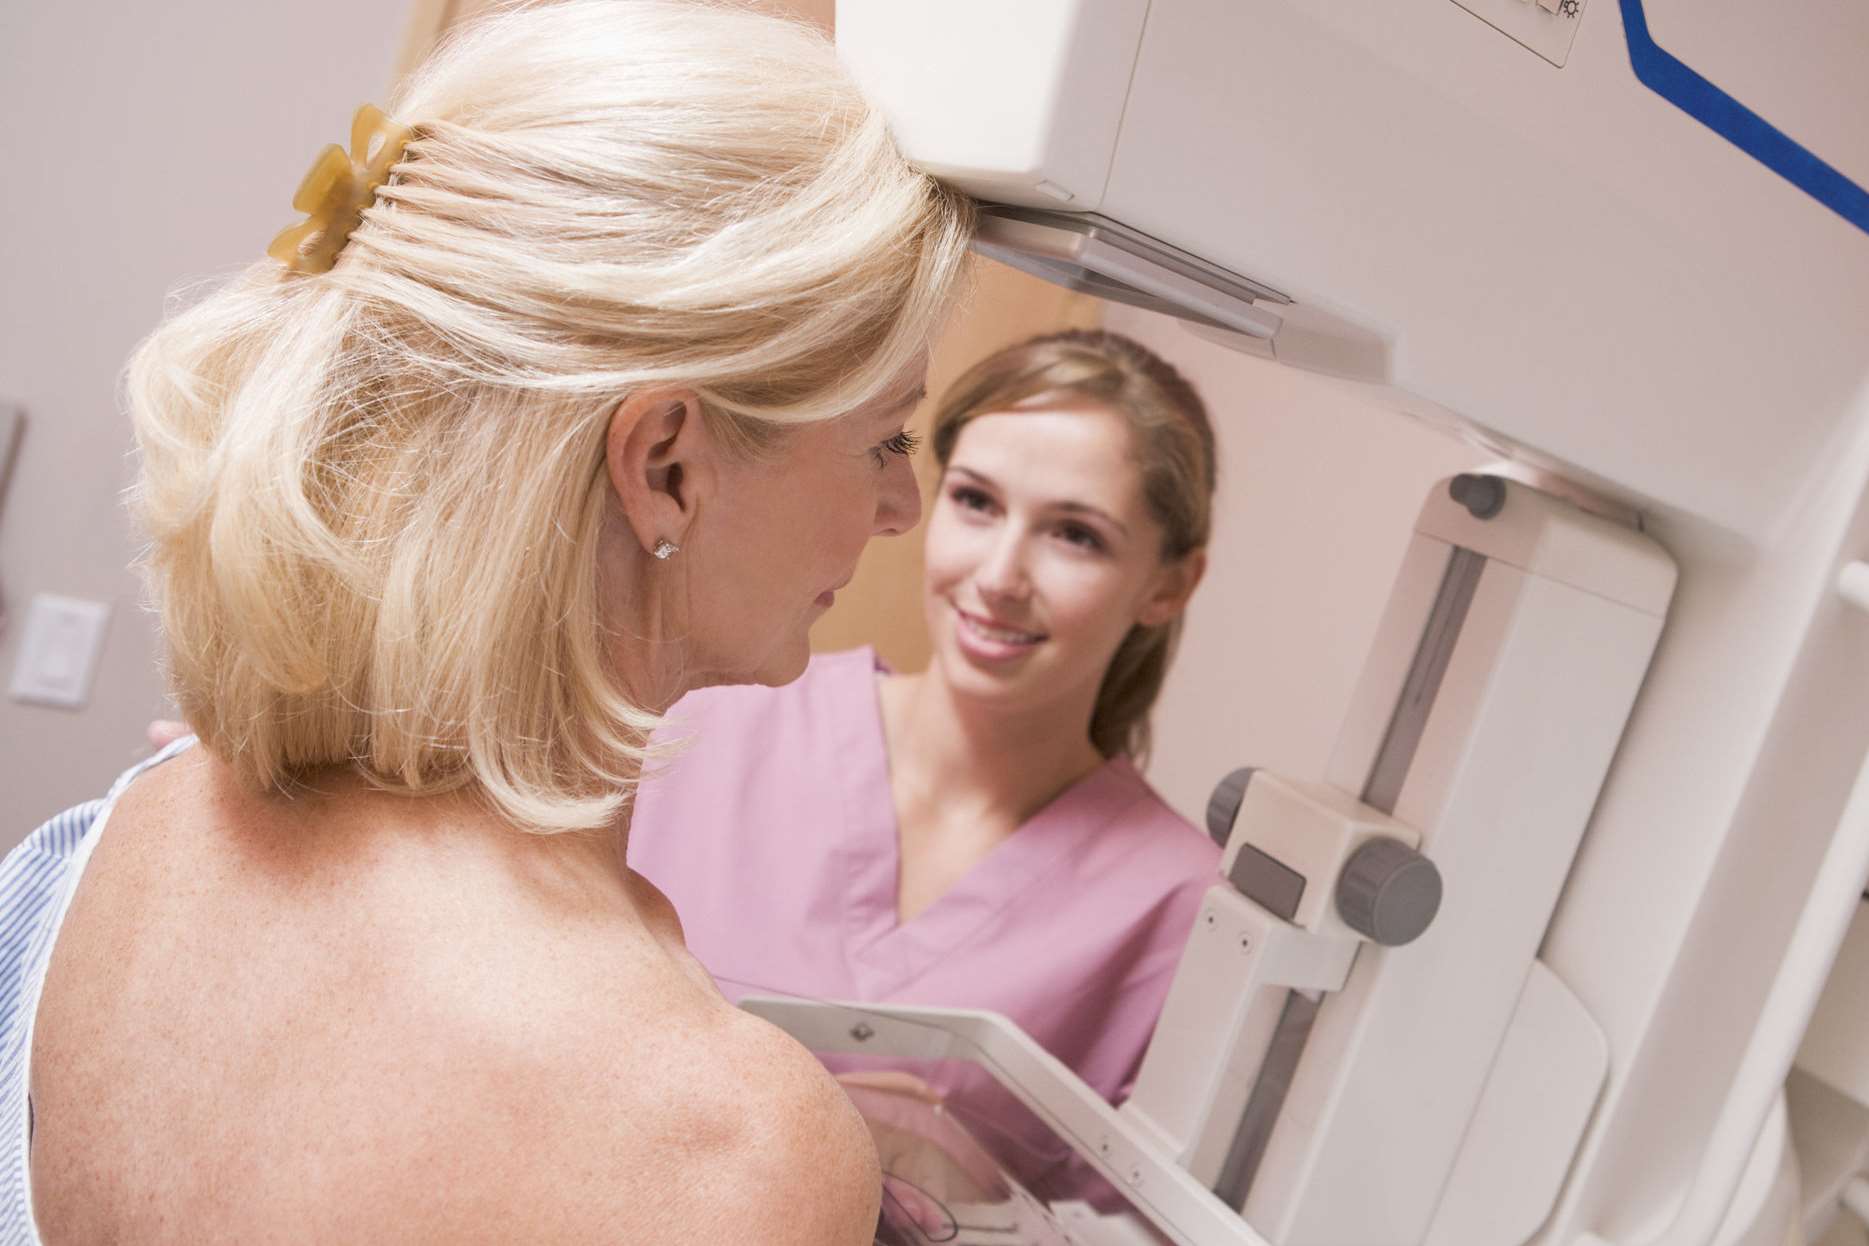 Around 5,000 people will be diagnosed with breast cancer this month